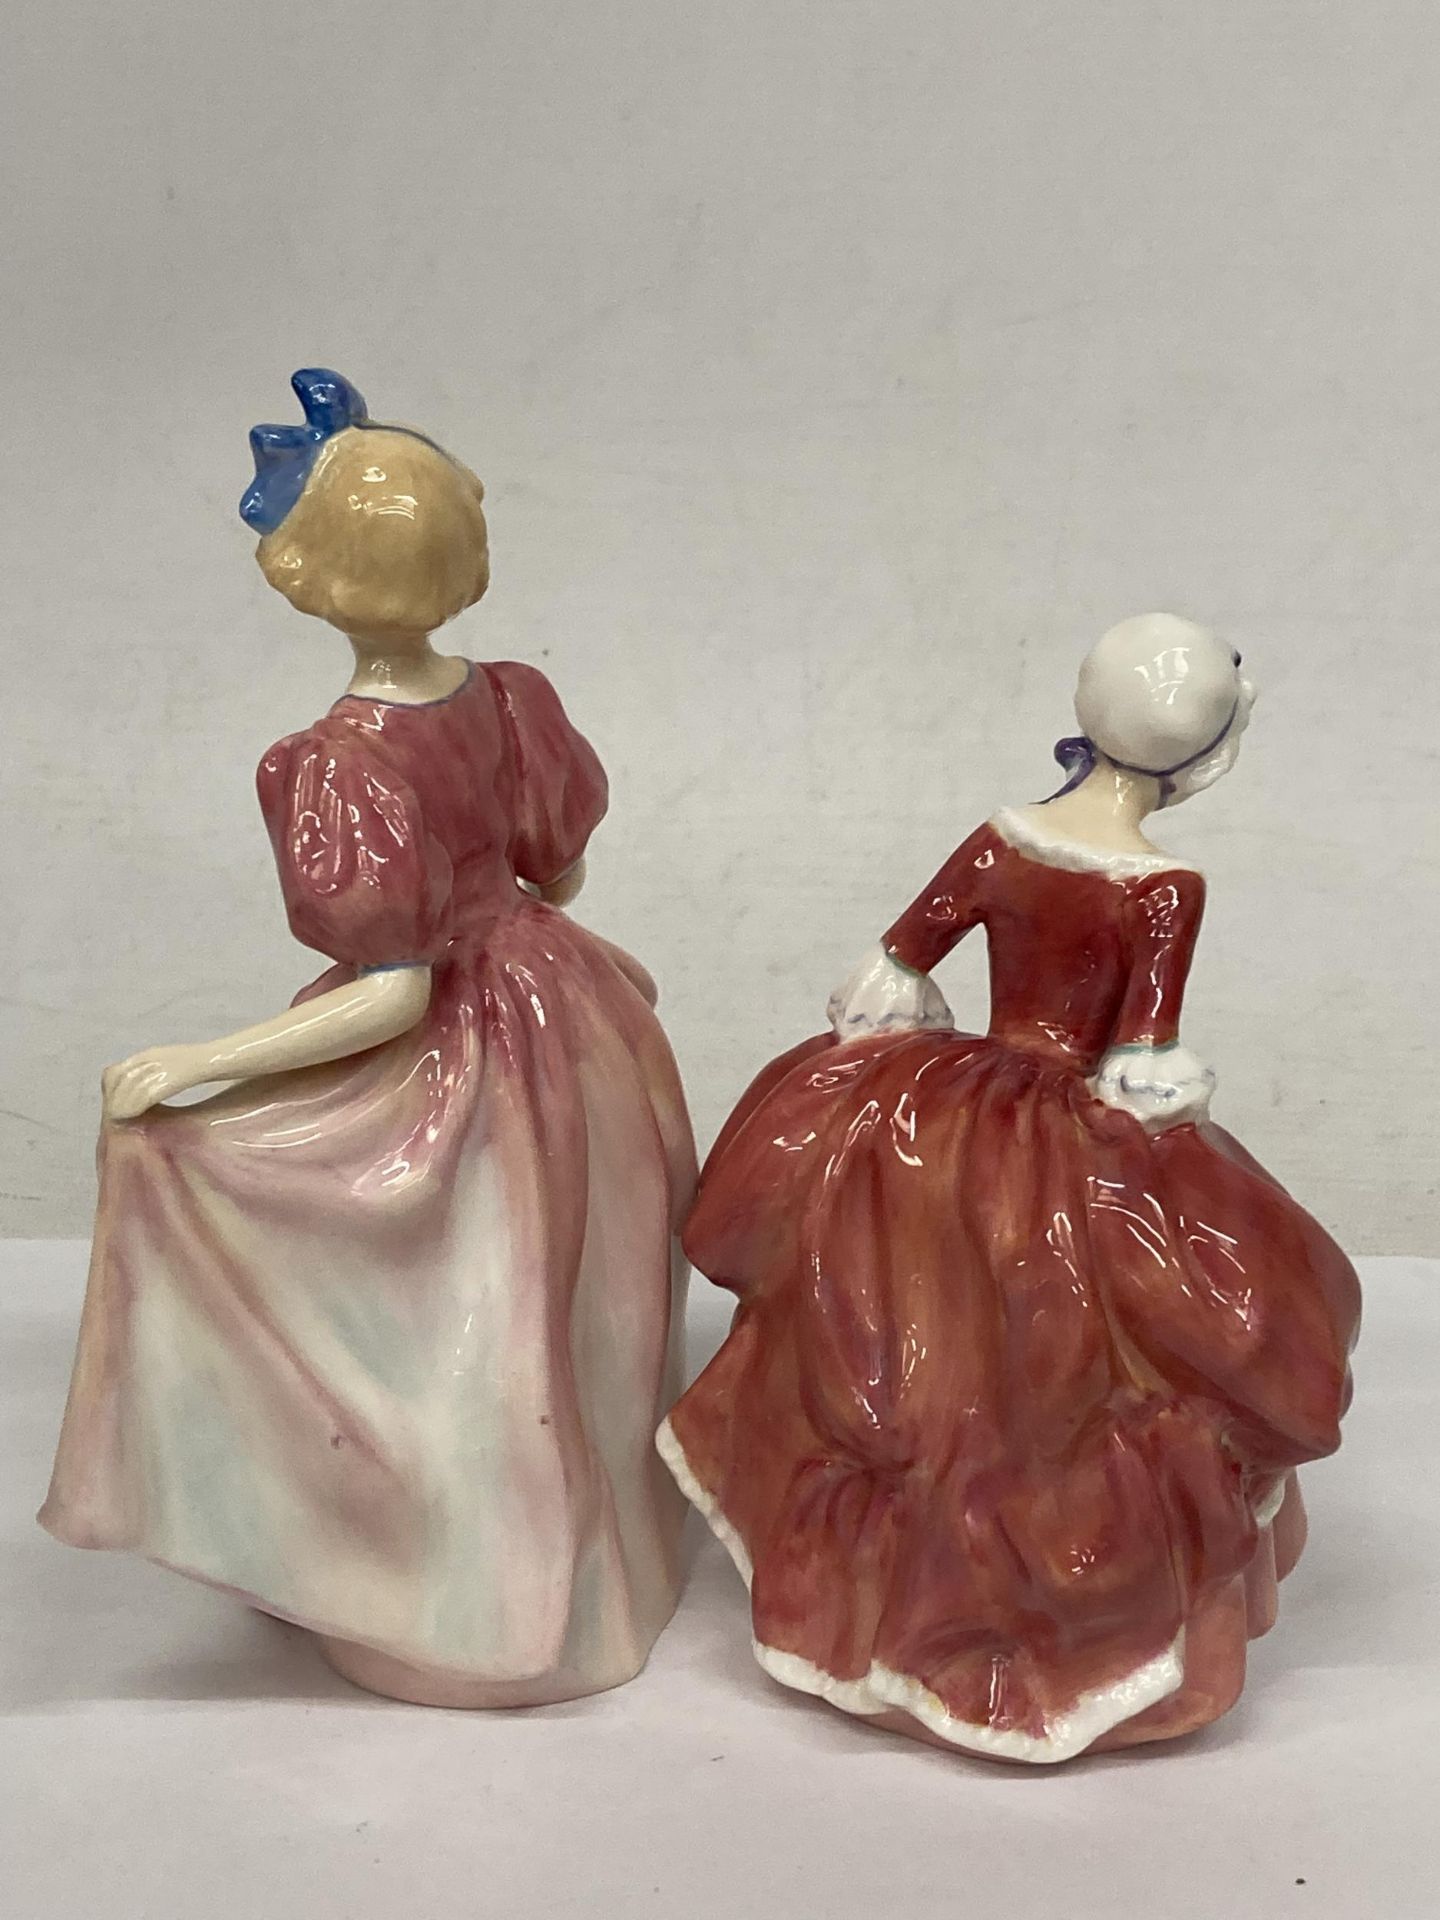 TWO ROYAL DOULTON FIGURINES "GOODY TWO SHOES" HN2037 AND "SWEETING" HN 1935 - Image 3 of 4